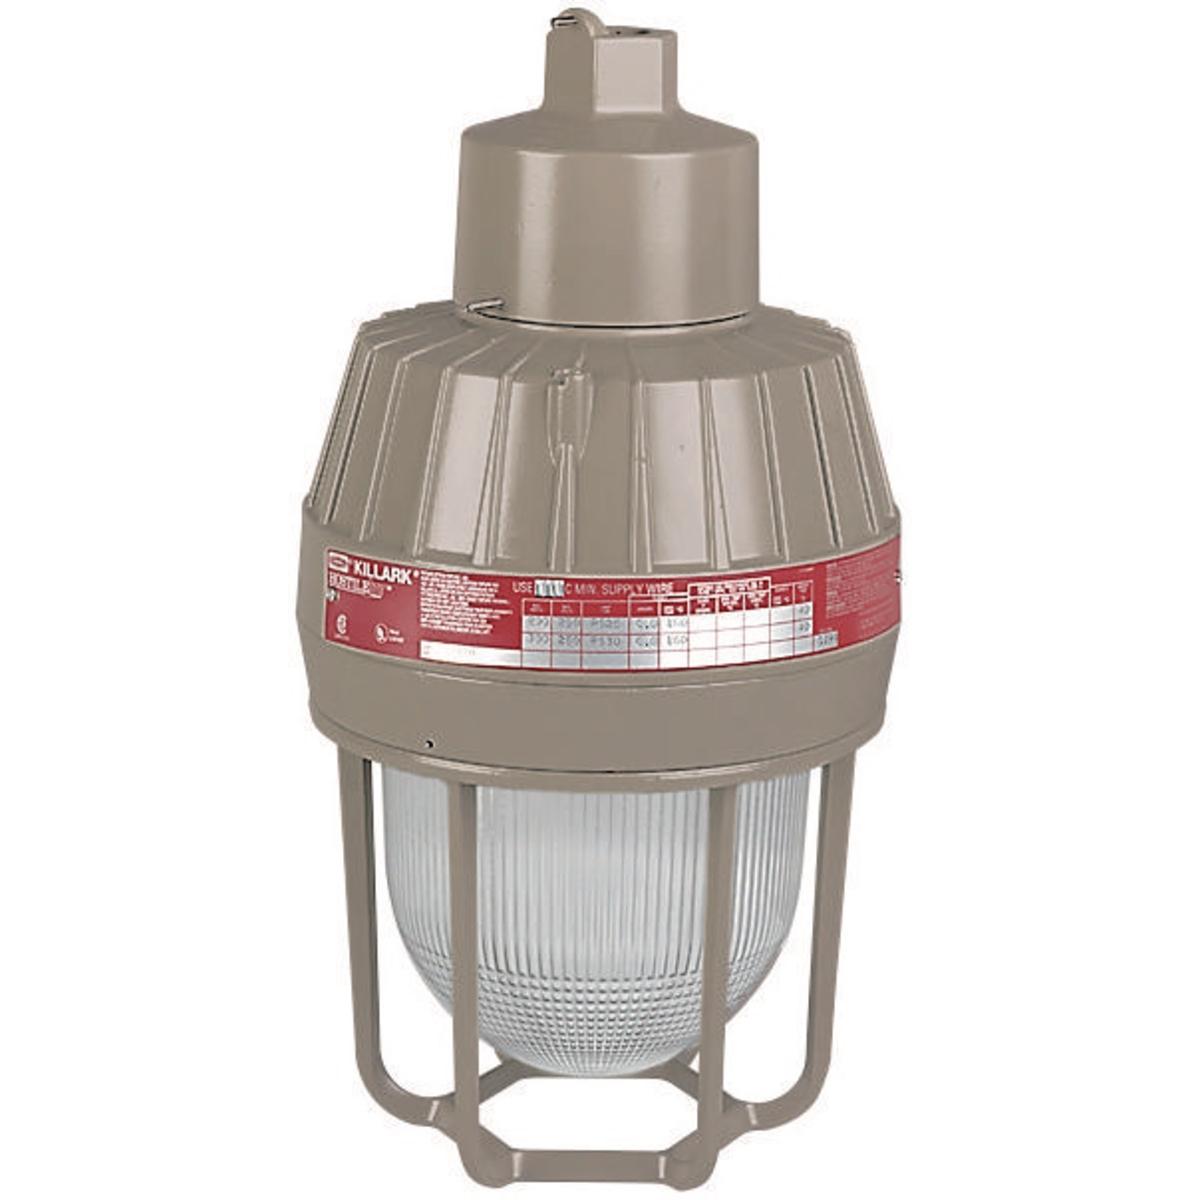 Hubbell EMI30A2GML Incandescent 300W 3/4" Pendant with Guard ML  ; Four light sources—Incandescent, compact fluorescent, high pressure sodium and metal halide ; Mounting choice—Pendant, ceiling, 25˚ stanchion or 90˚ wall mount, all with “wireless” design that allows fast, e